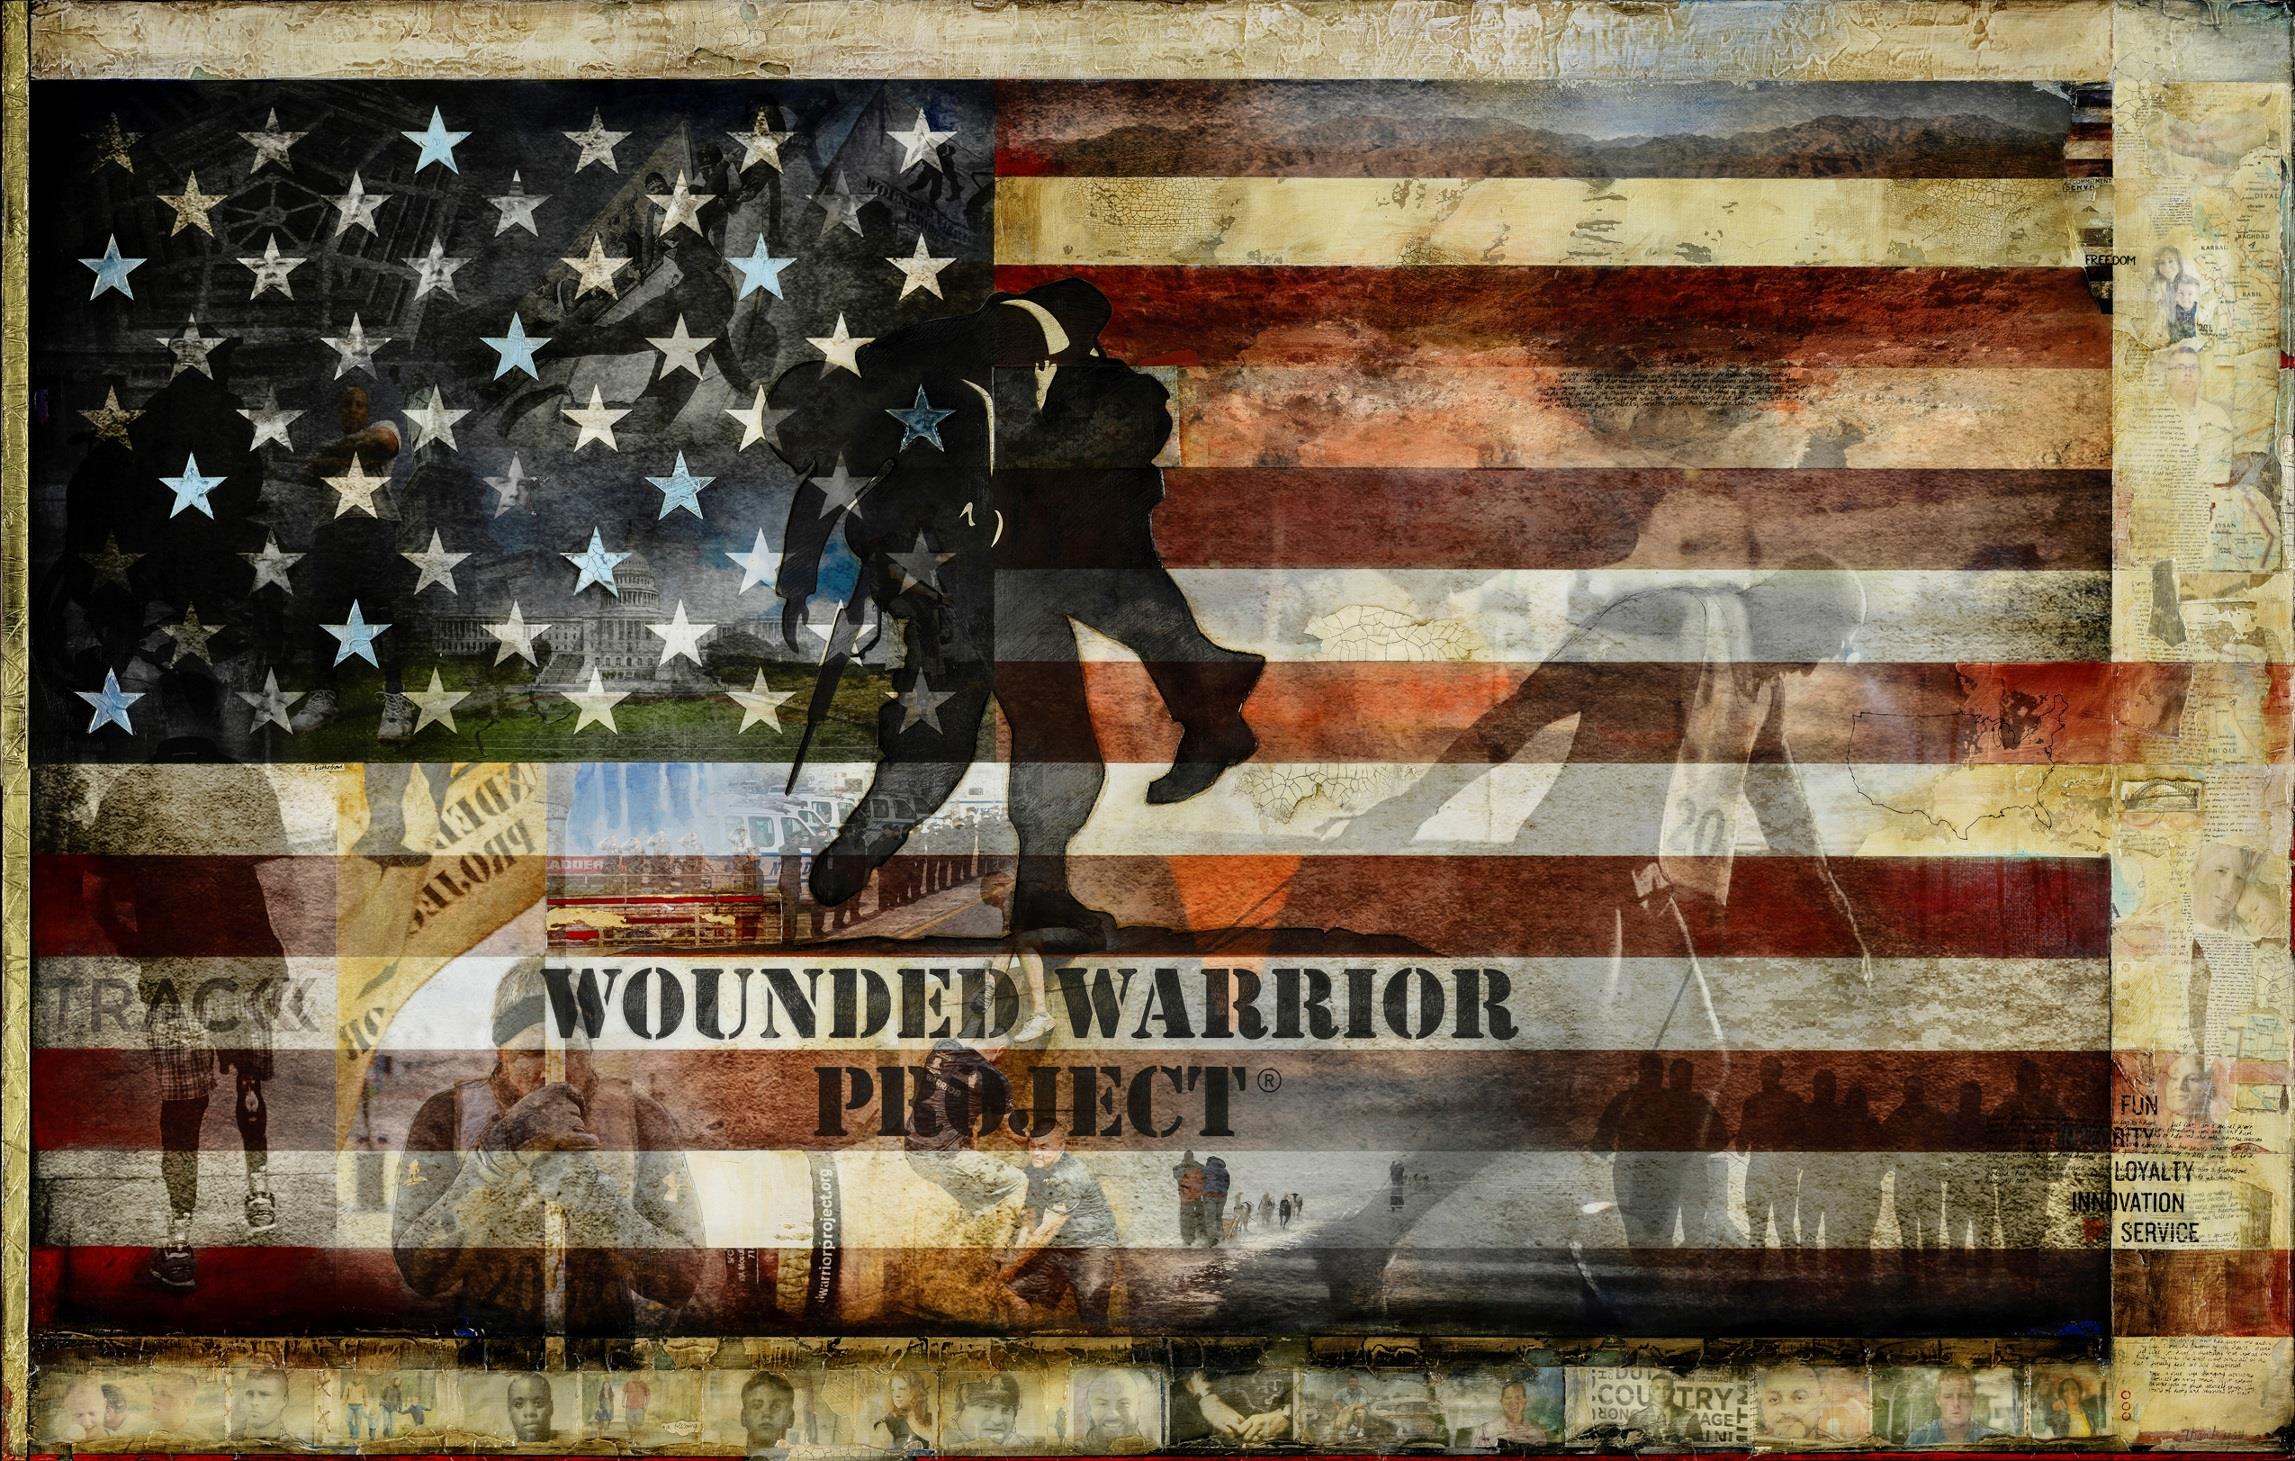 Artists Donate to Wounded Warrior Project